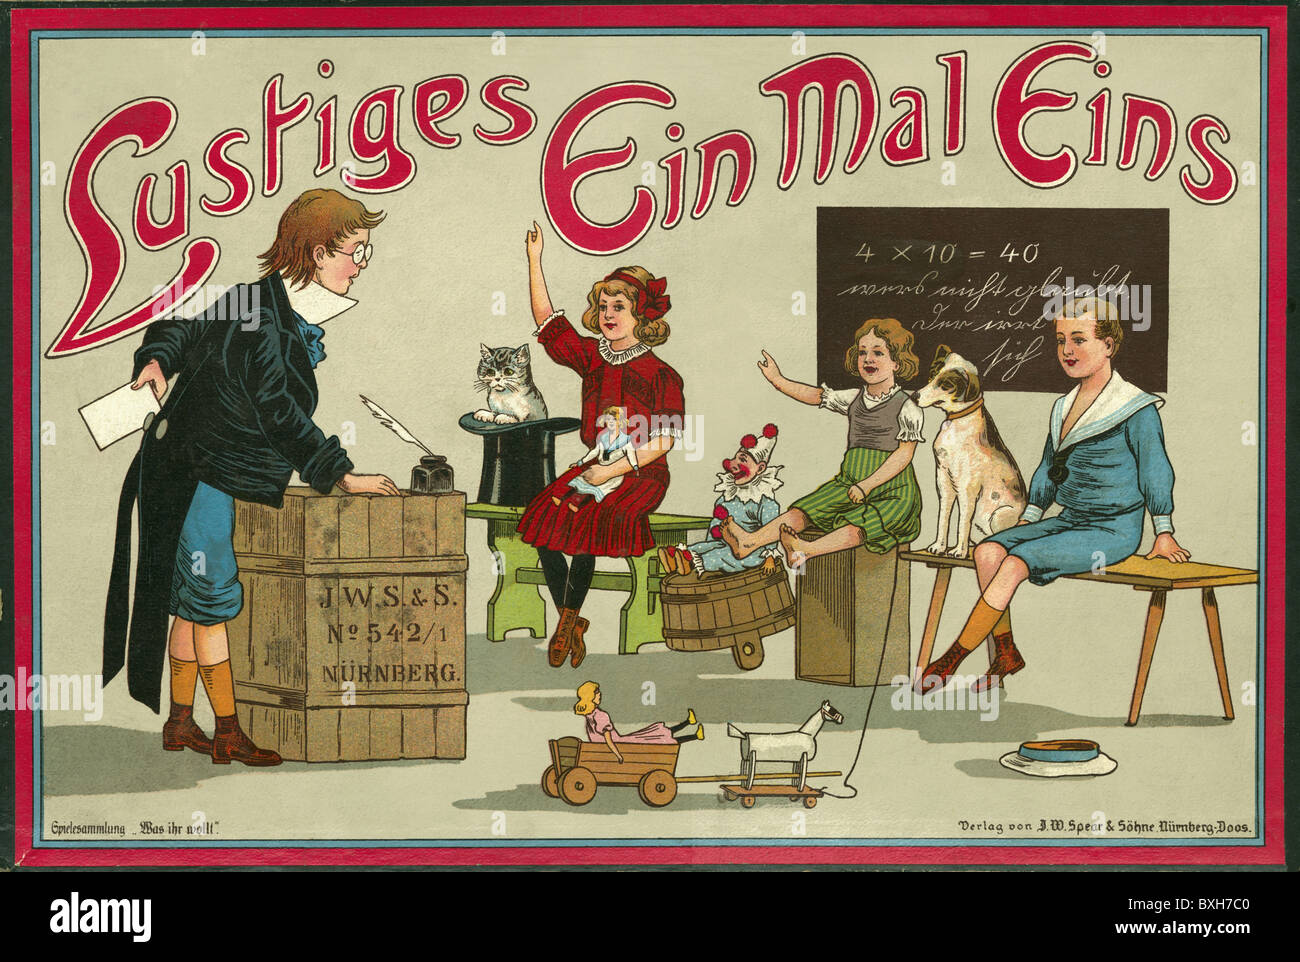 game, parlour games, 'Lustiges Ein Mal Eins' (Funny multiplication table), Nuremberg (J. W. Spear & Söhne), Germany, circa 1910, Additional-Rights-Clearences-Not Available Stock Photo